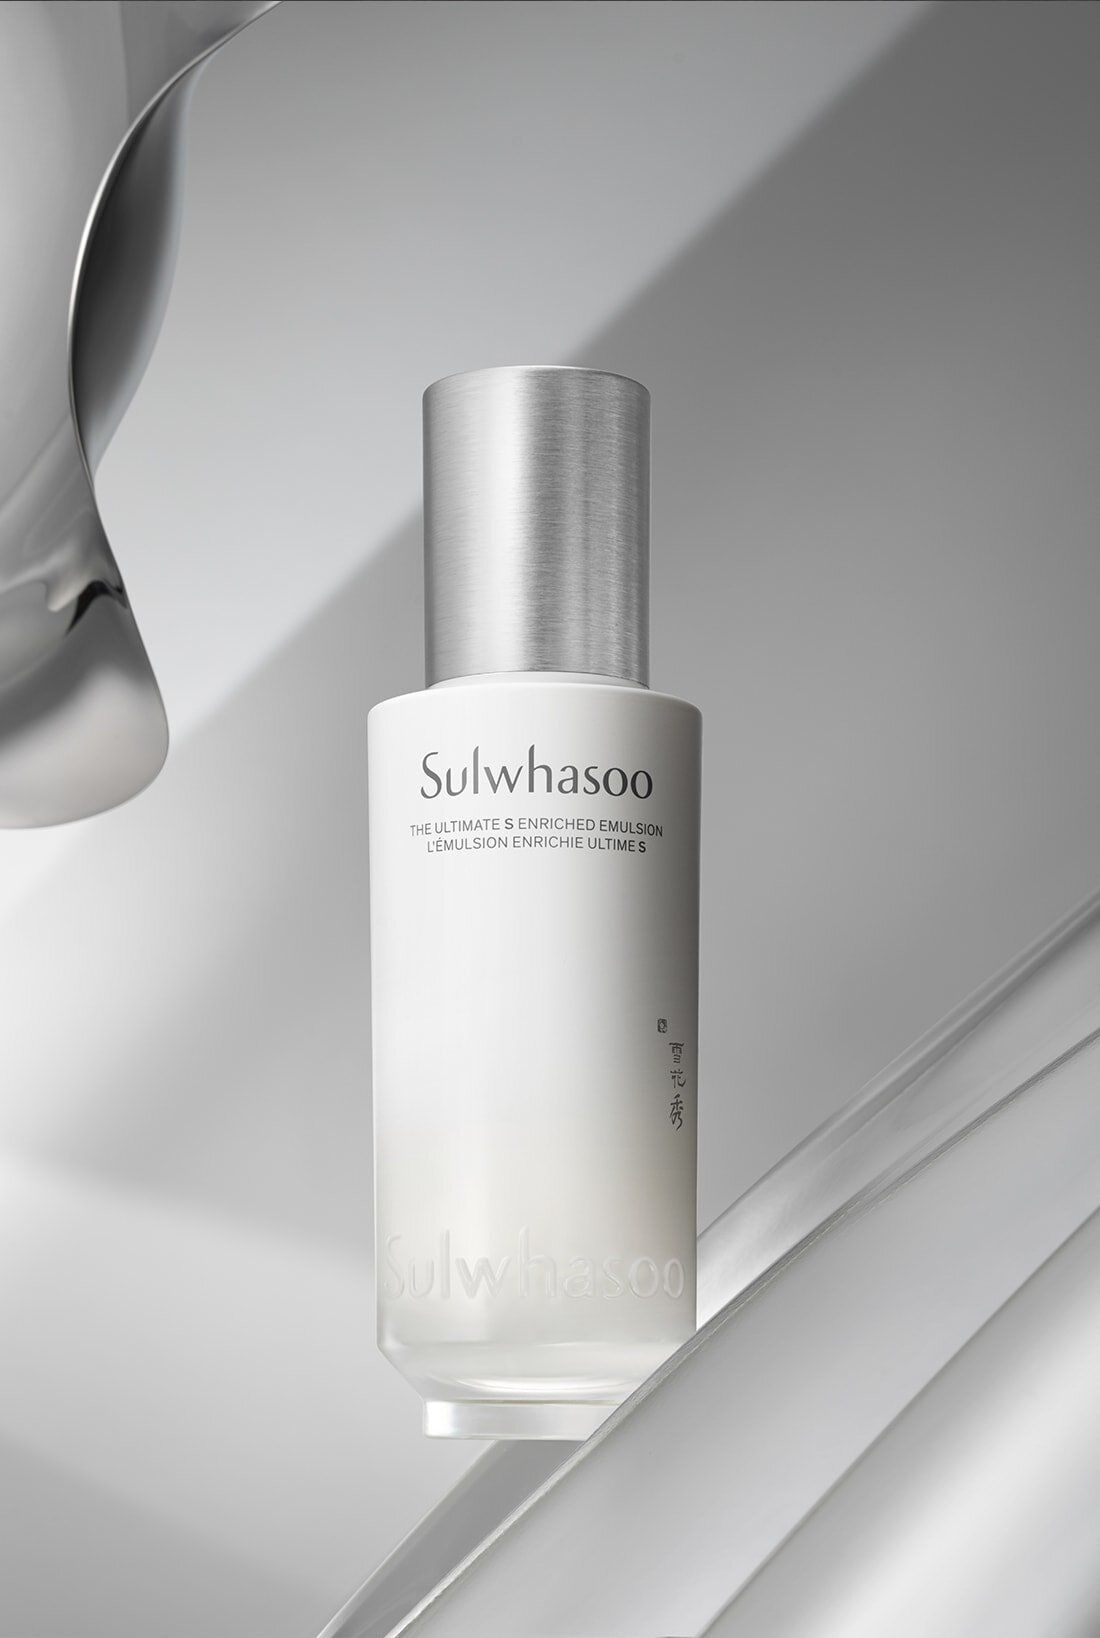 Sulwhasoo THE ULTIMATE S ENRICHED EMULSION